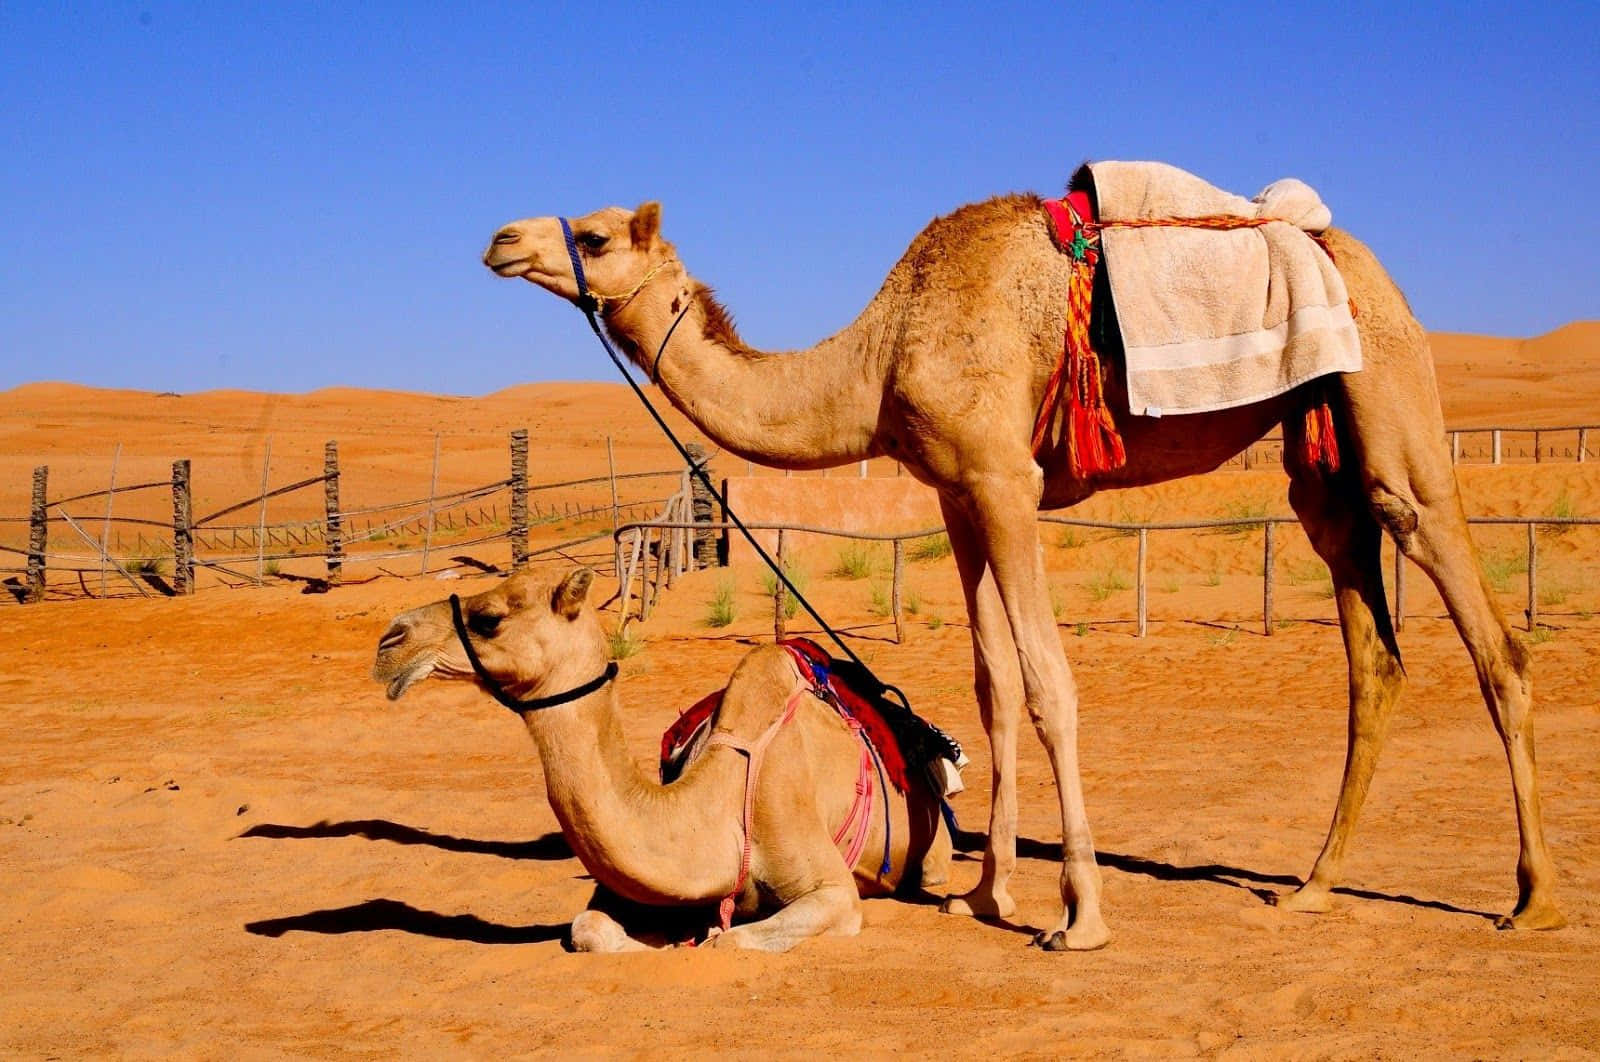 Two Camels Are Sitting In The Desert